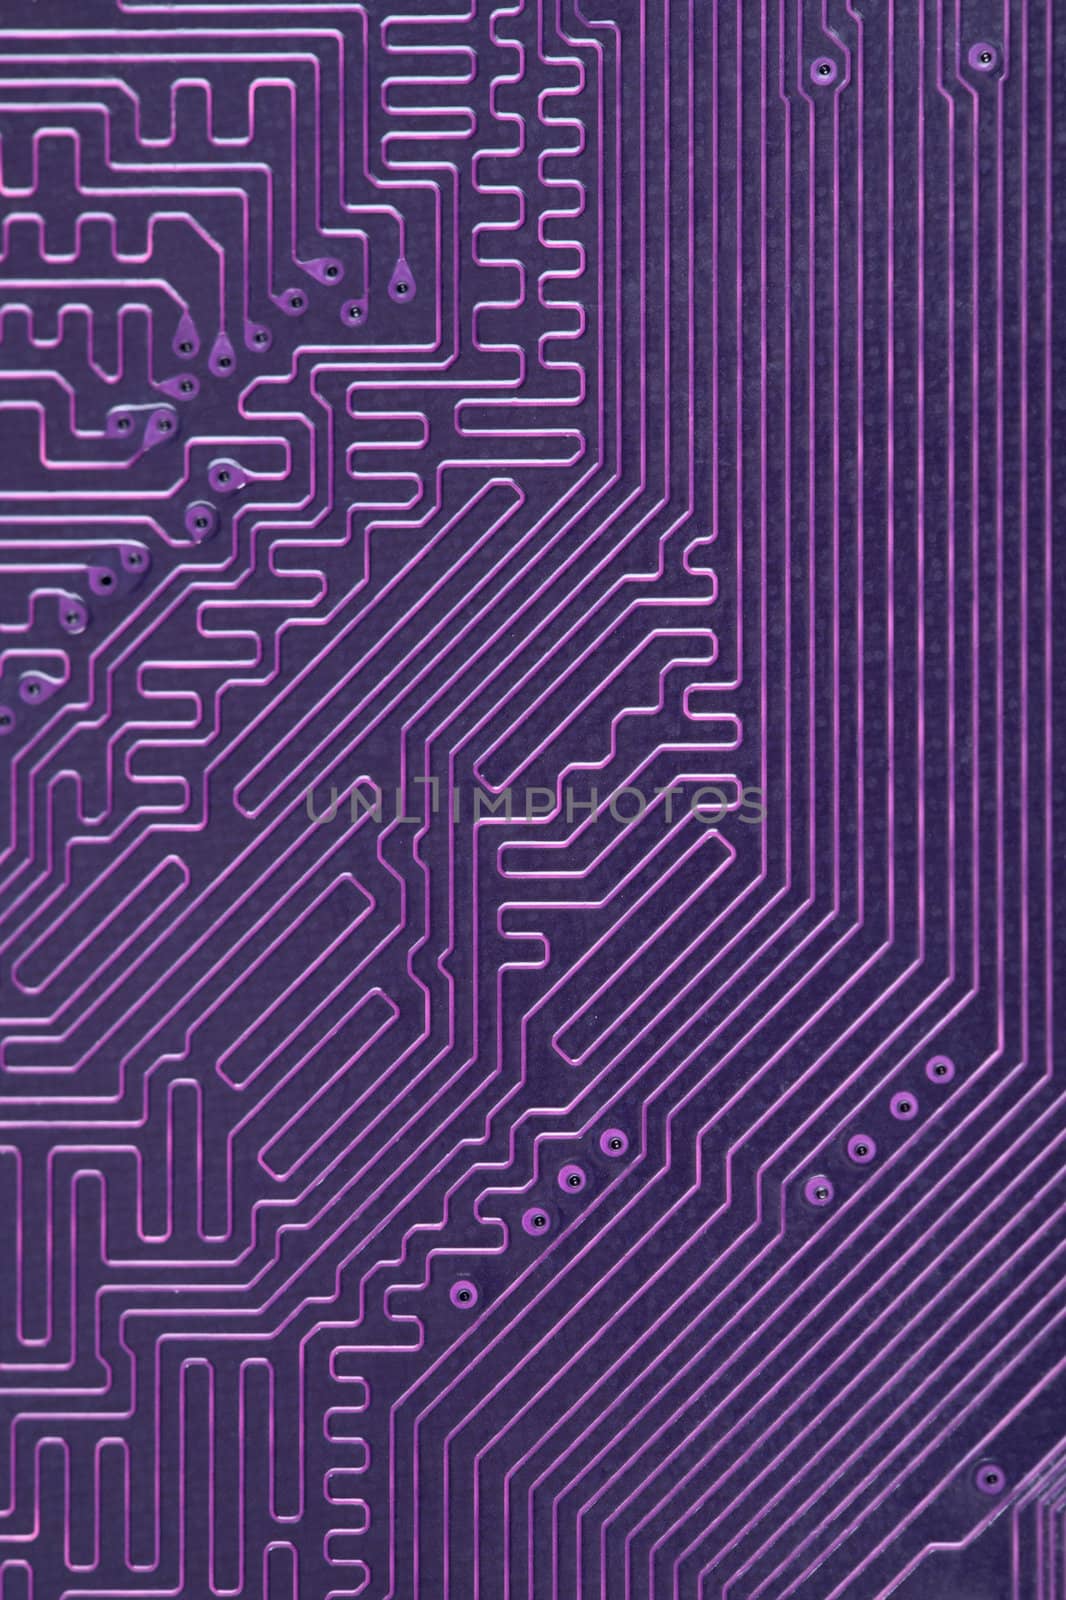 The abstract electronic technological computer violet background